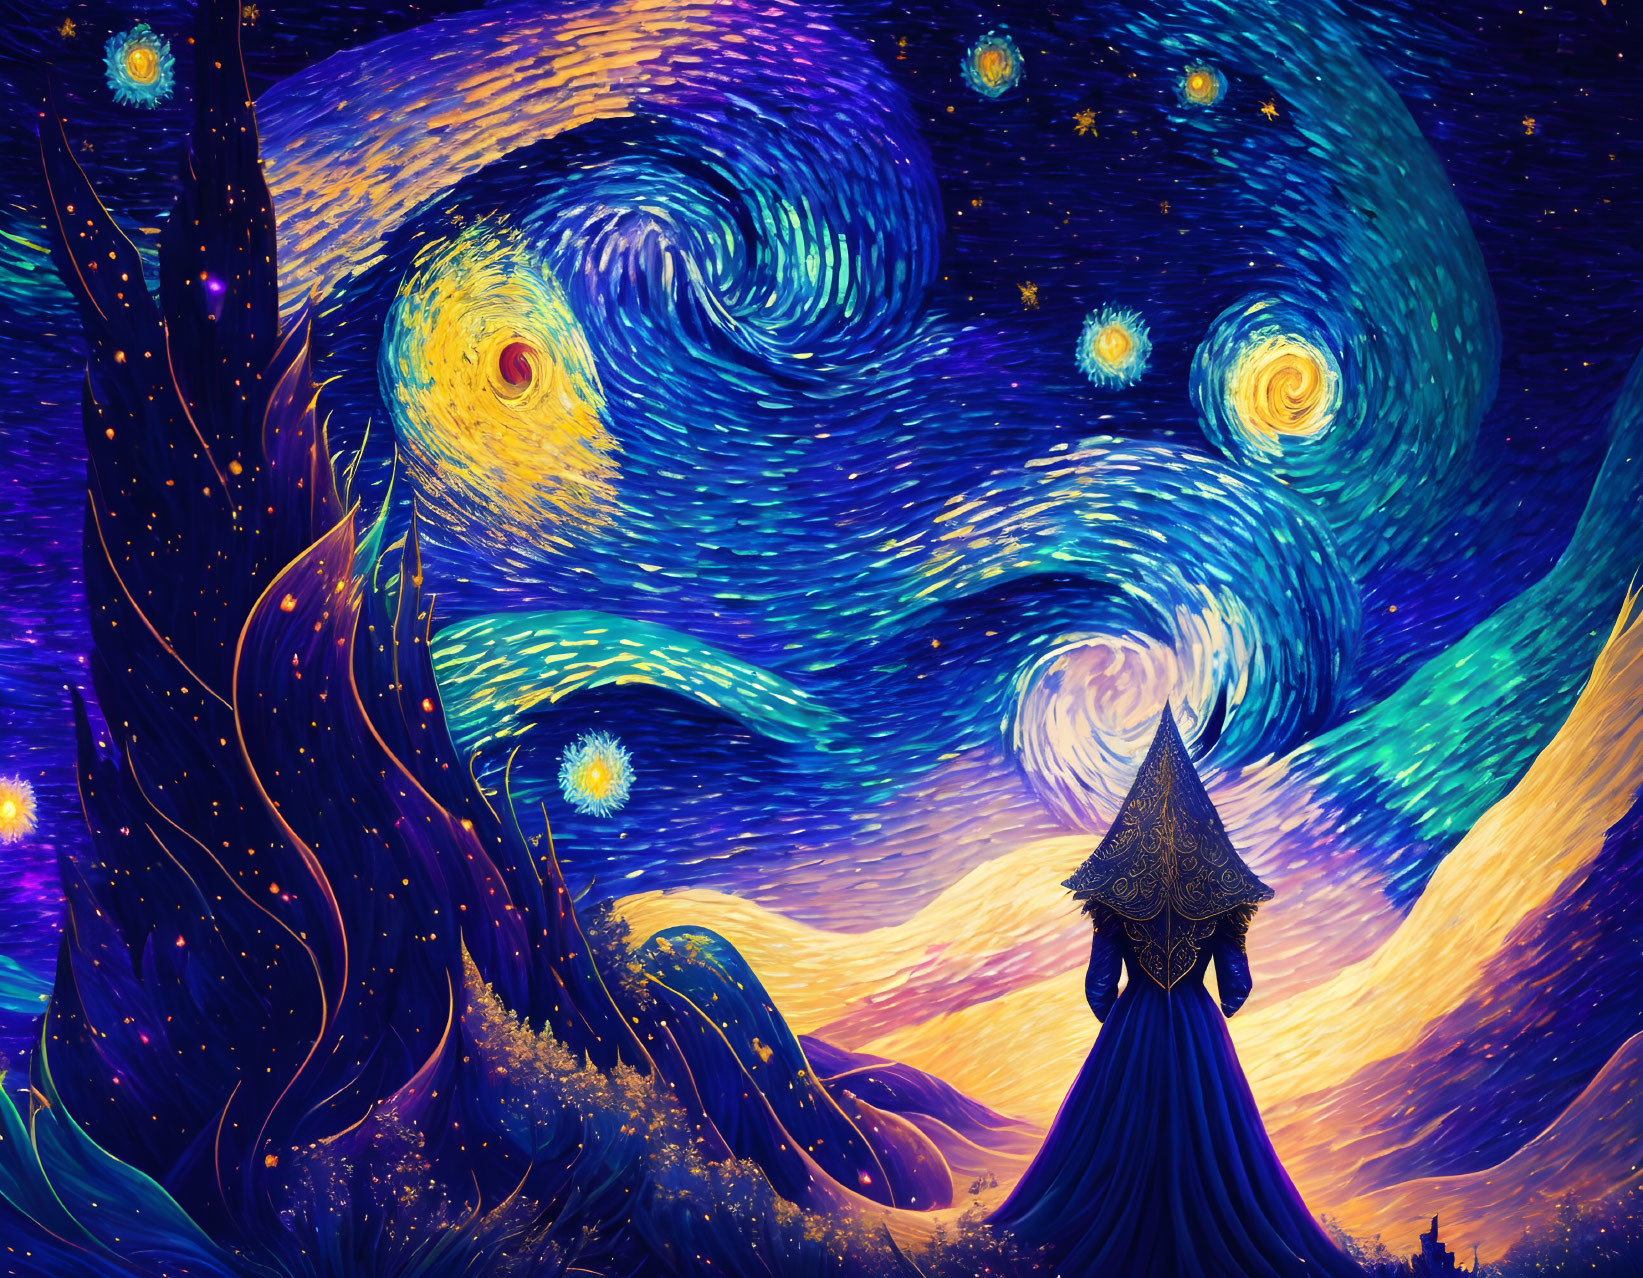 Digital artwork: Swirling celestial patterns with figure in cloak, vibrant blues, yellows, oranges